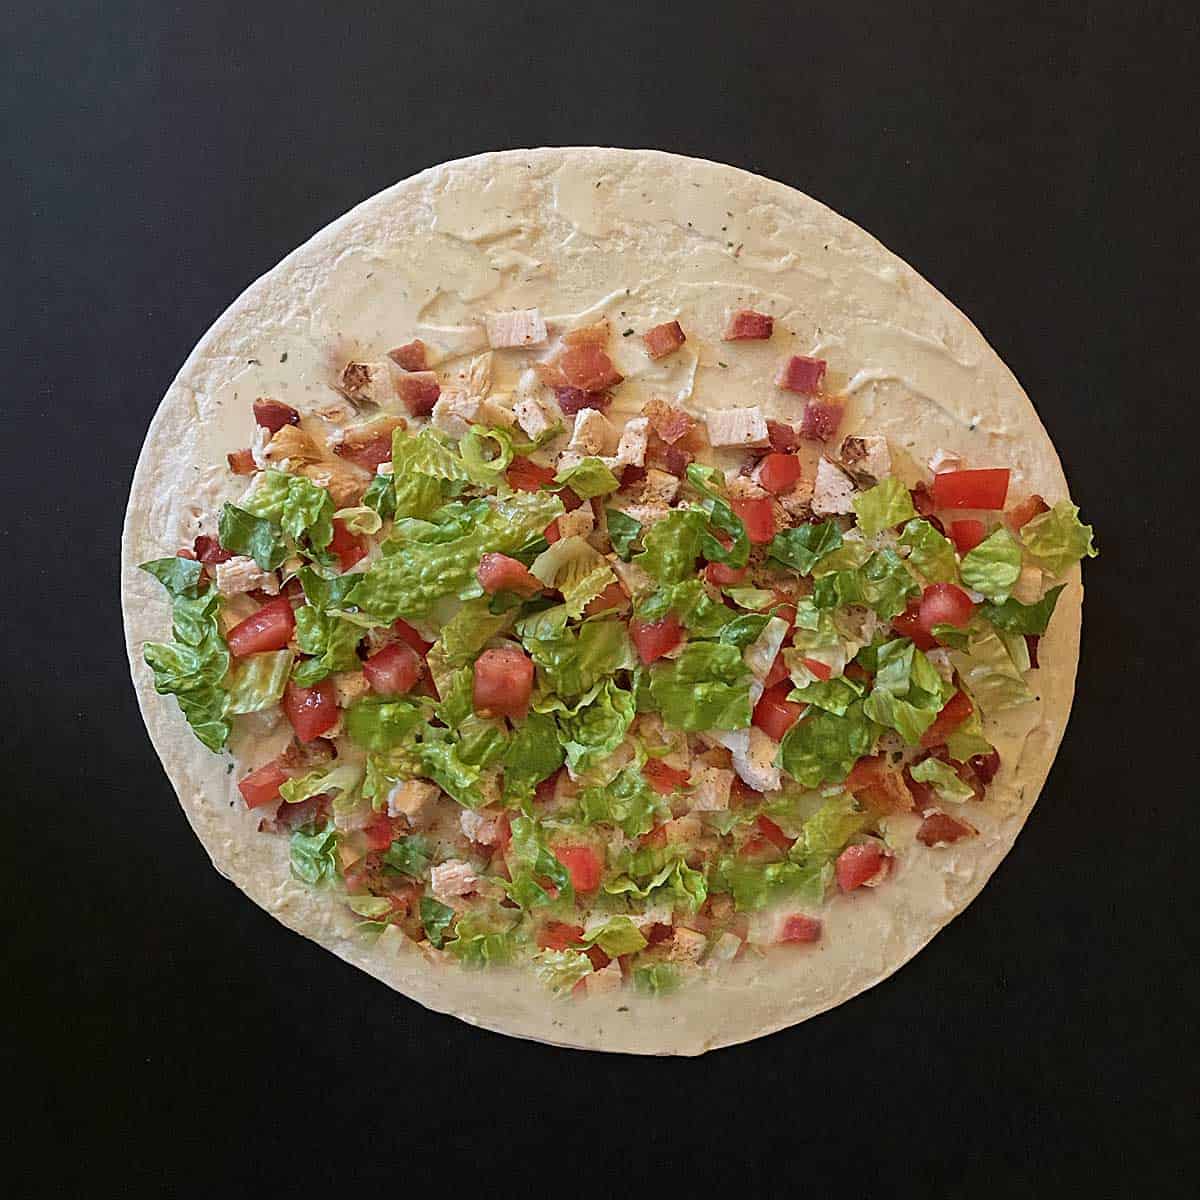 A flour tortilla spread with ranch mayo and sprinkled with chicken, bacon, lettuce and tomato.